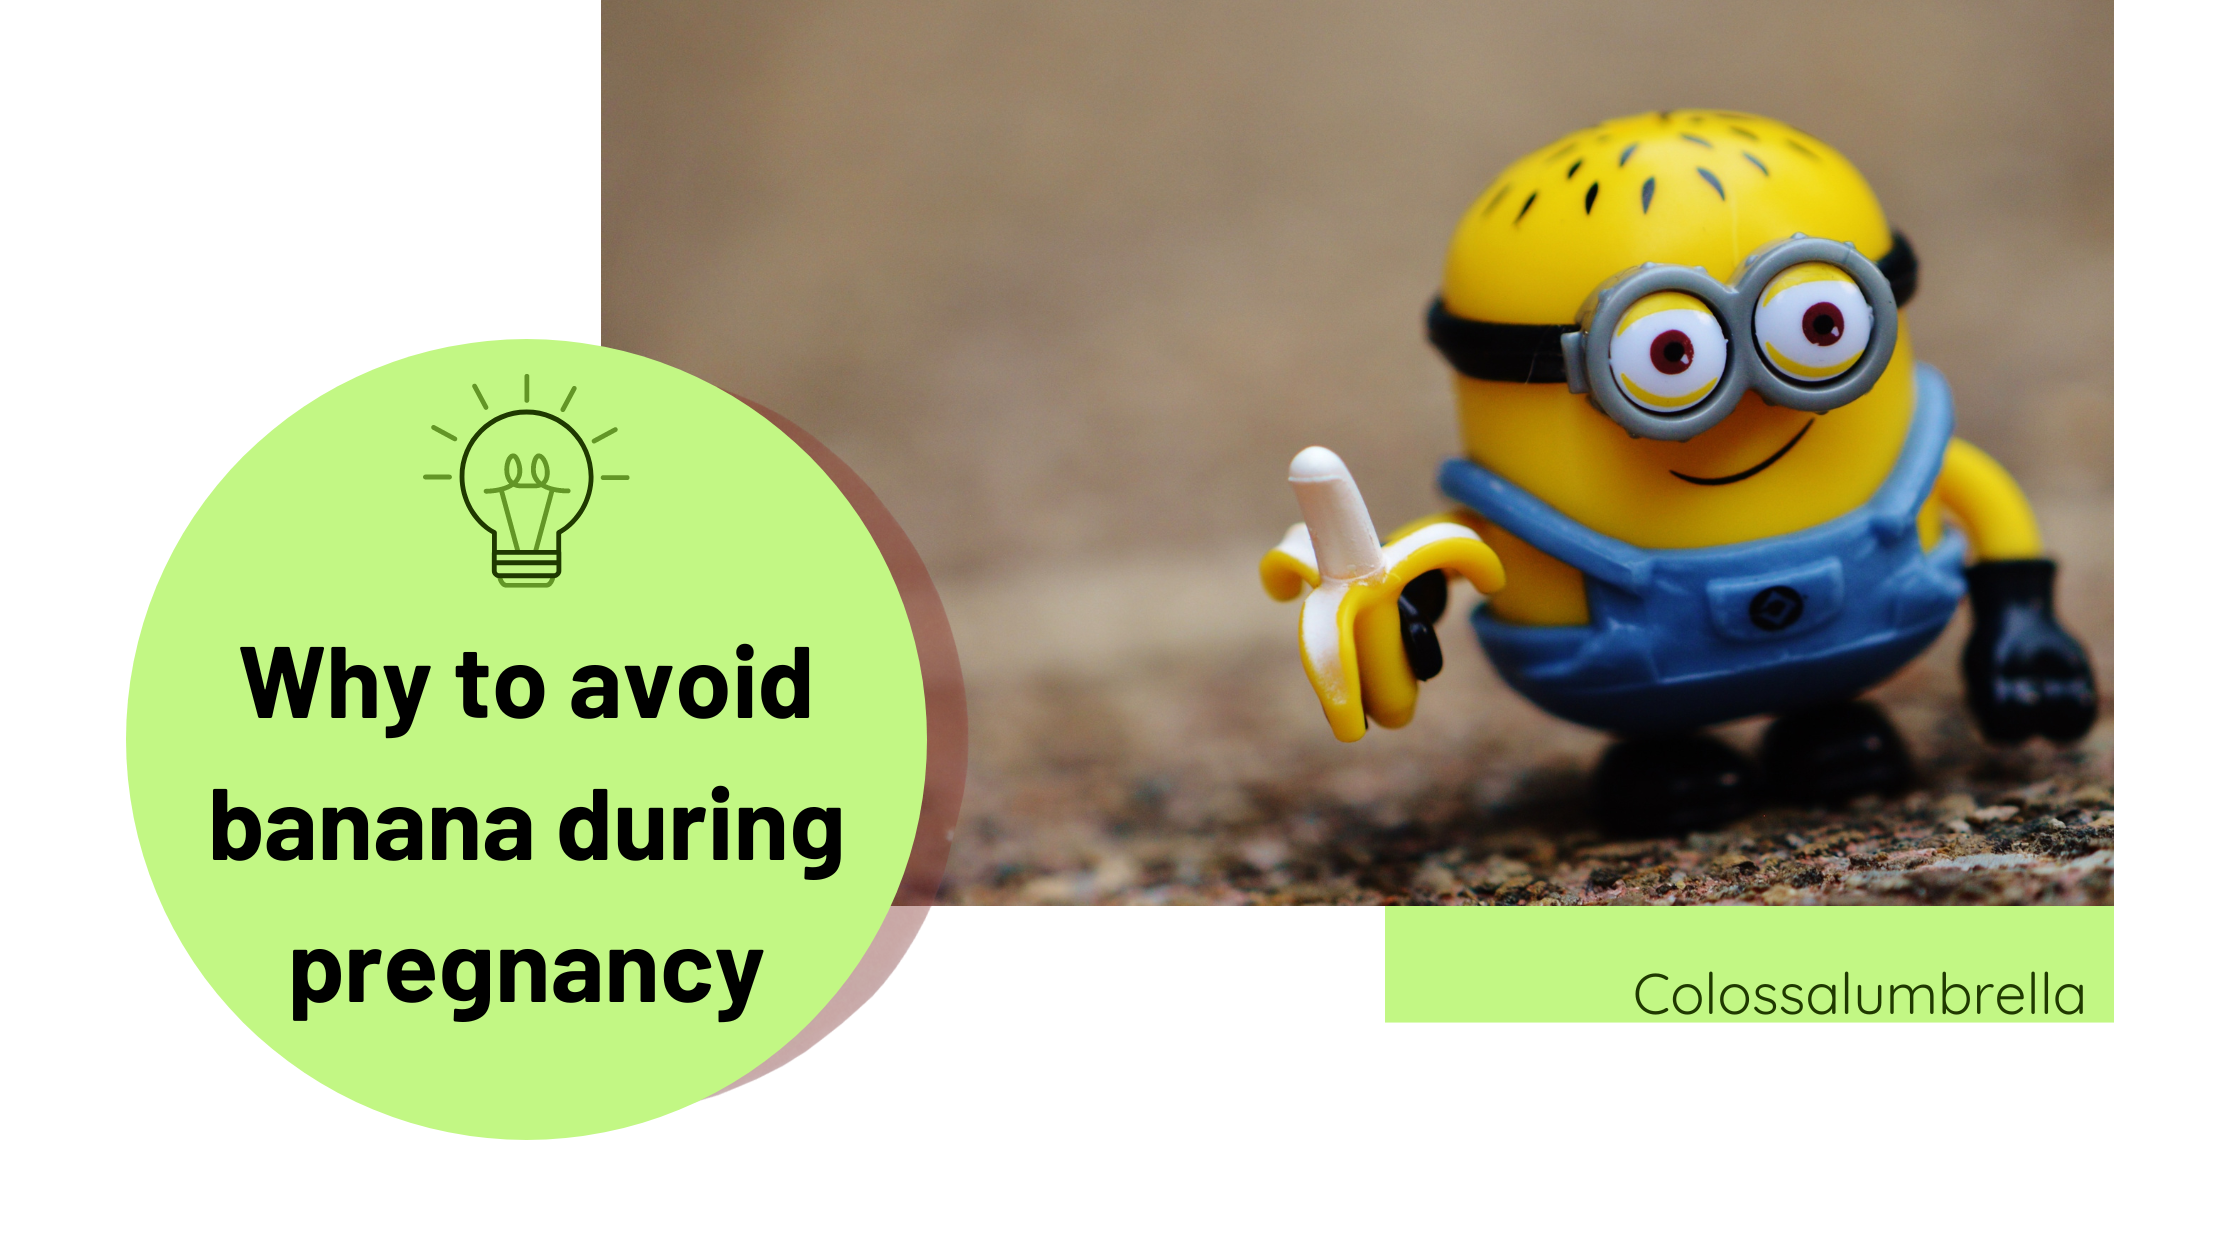 7 reasons why to avoid banana during pregnancy by Colossalumbrella